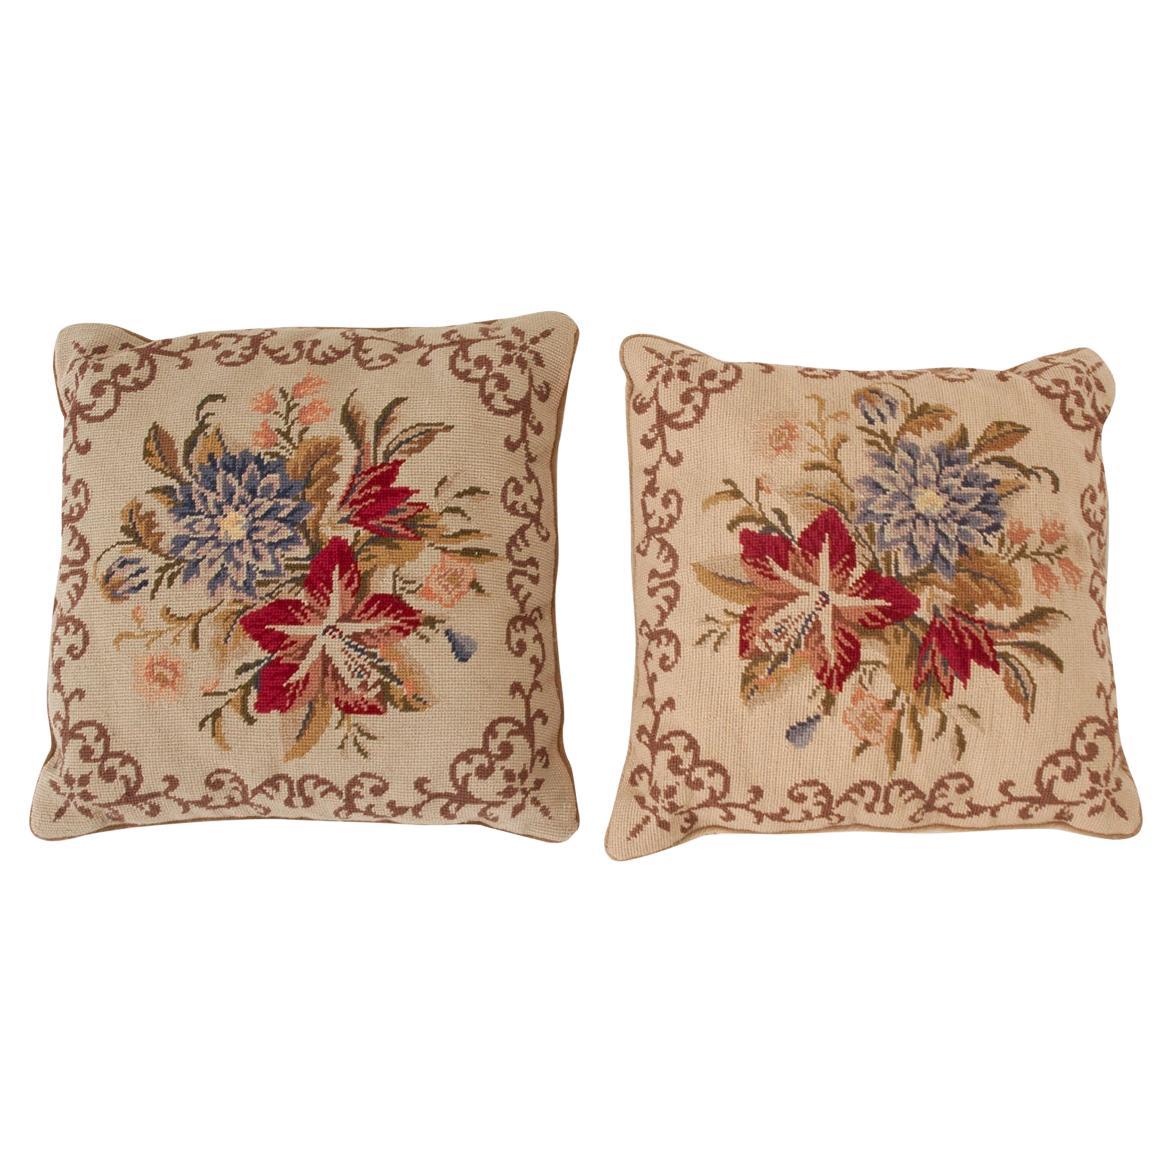 Pair of Vintage Square Needlepoint Pillows For Sale